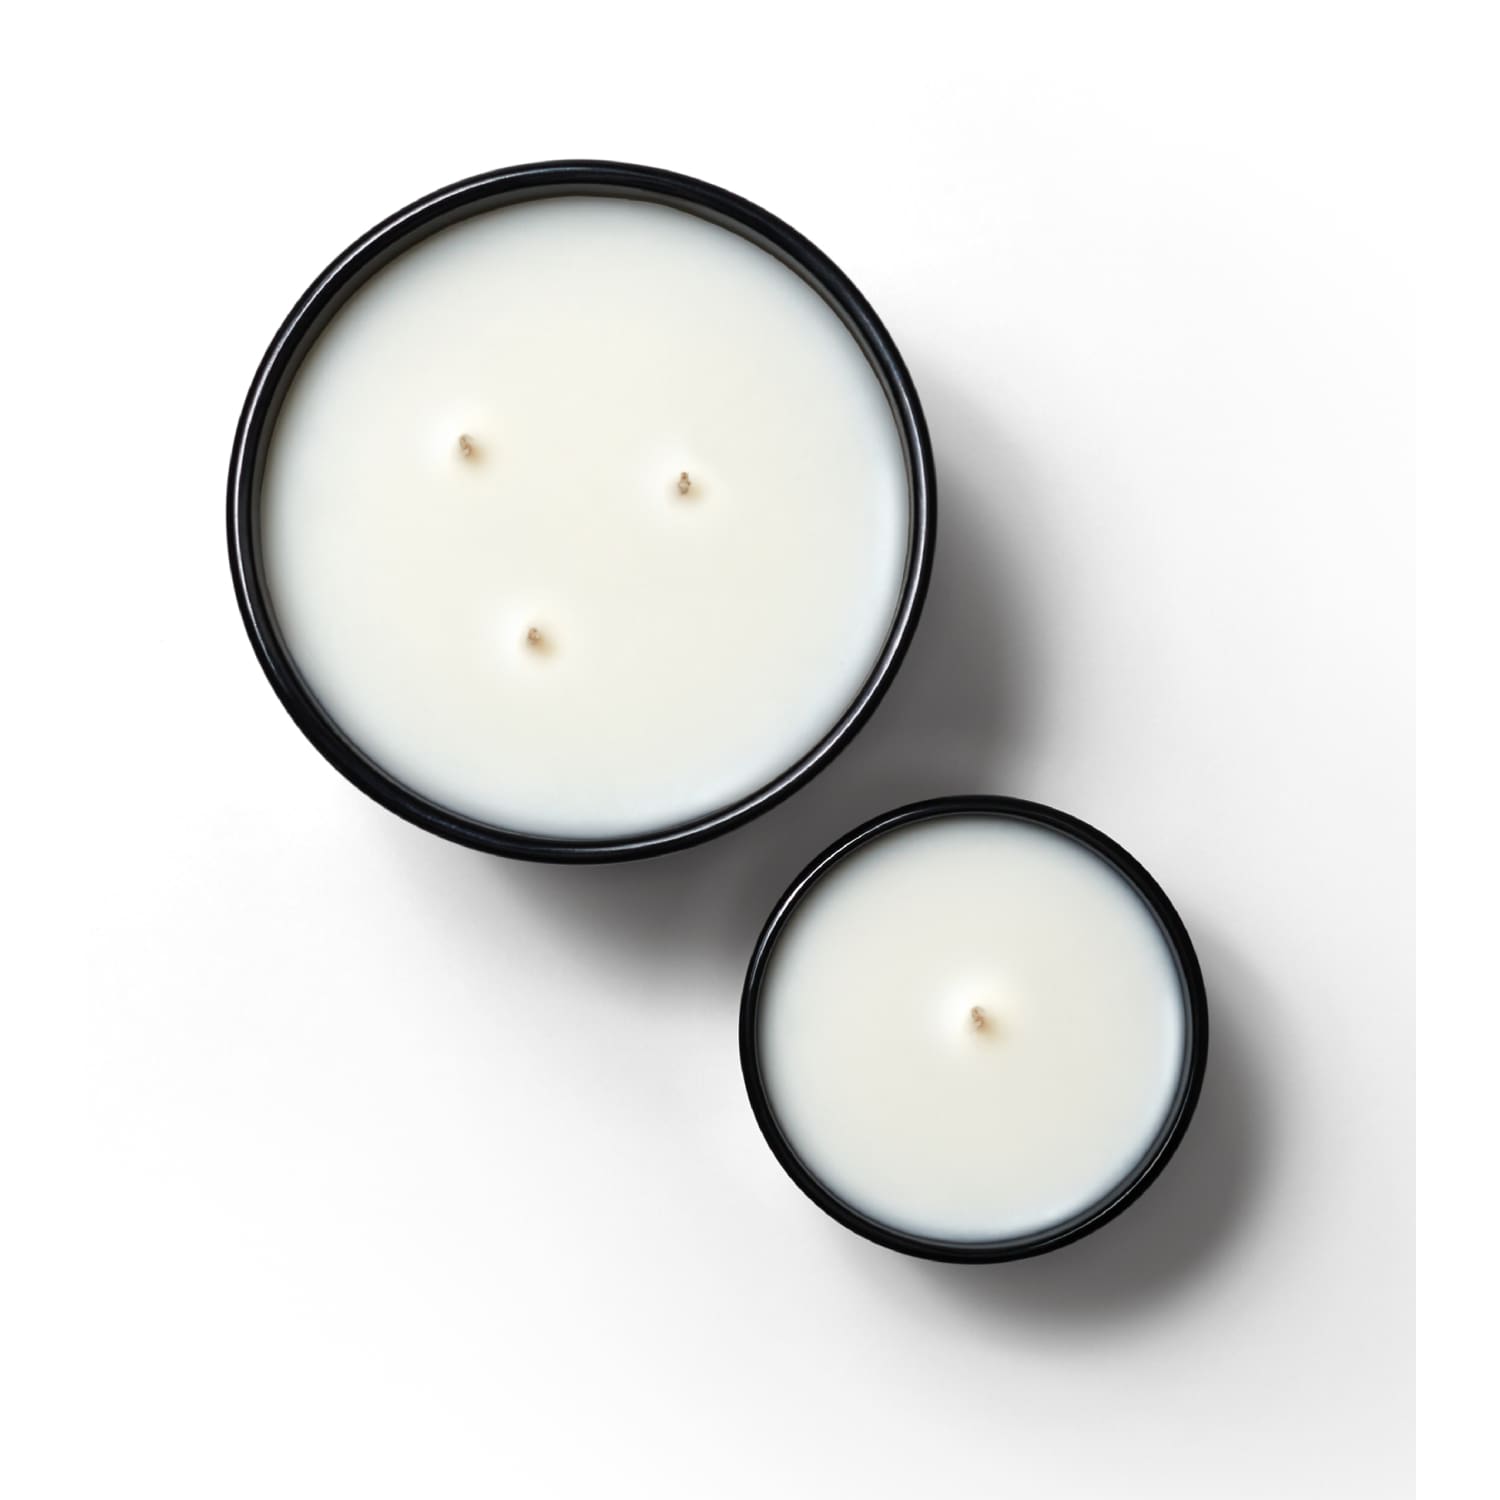 Boy Smells Cameo Candle - Magnum Beeswax Candle - Boy Smells